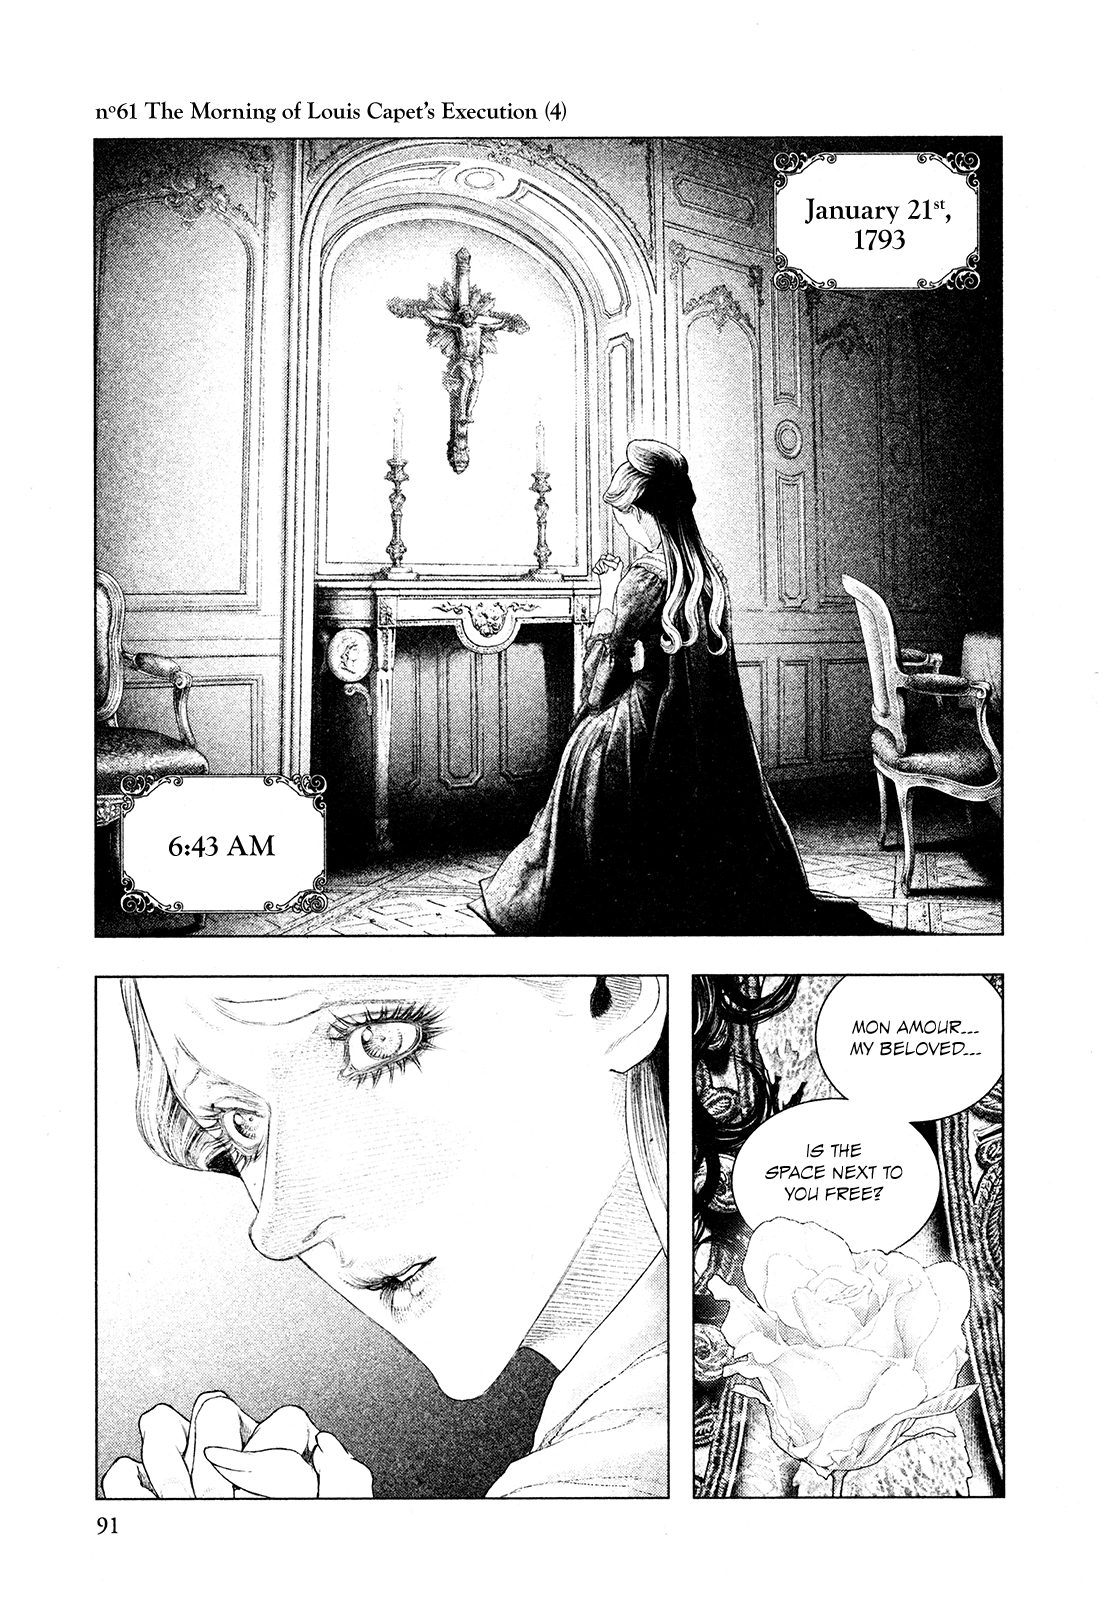 Innocent Rouge Vol.9-Chapter.61-The-Morning-of-Louis-Capet's-Execution-(4) Image